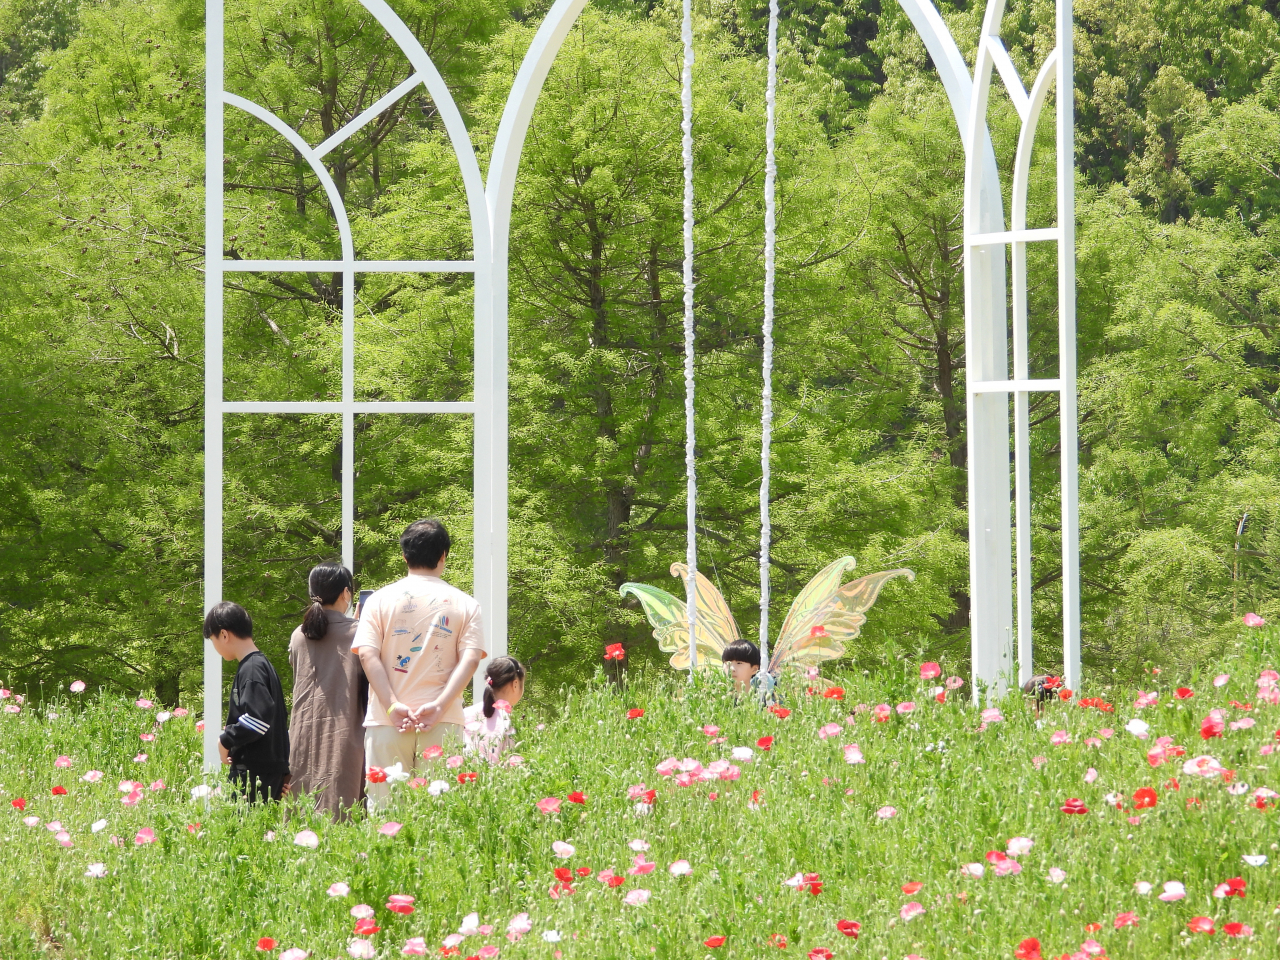 Visitors enjoy a spring moment at the Hampyeong Butterfly Festival. (Hampyeong Tourism Organization)